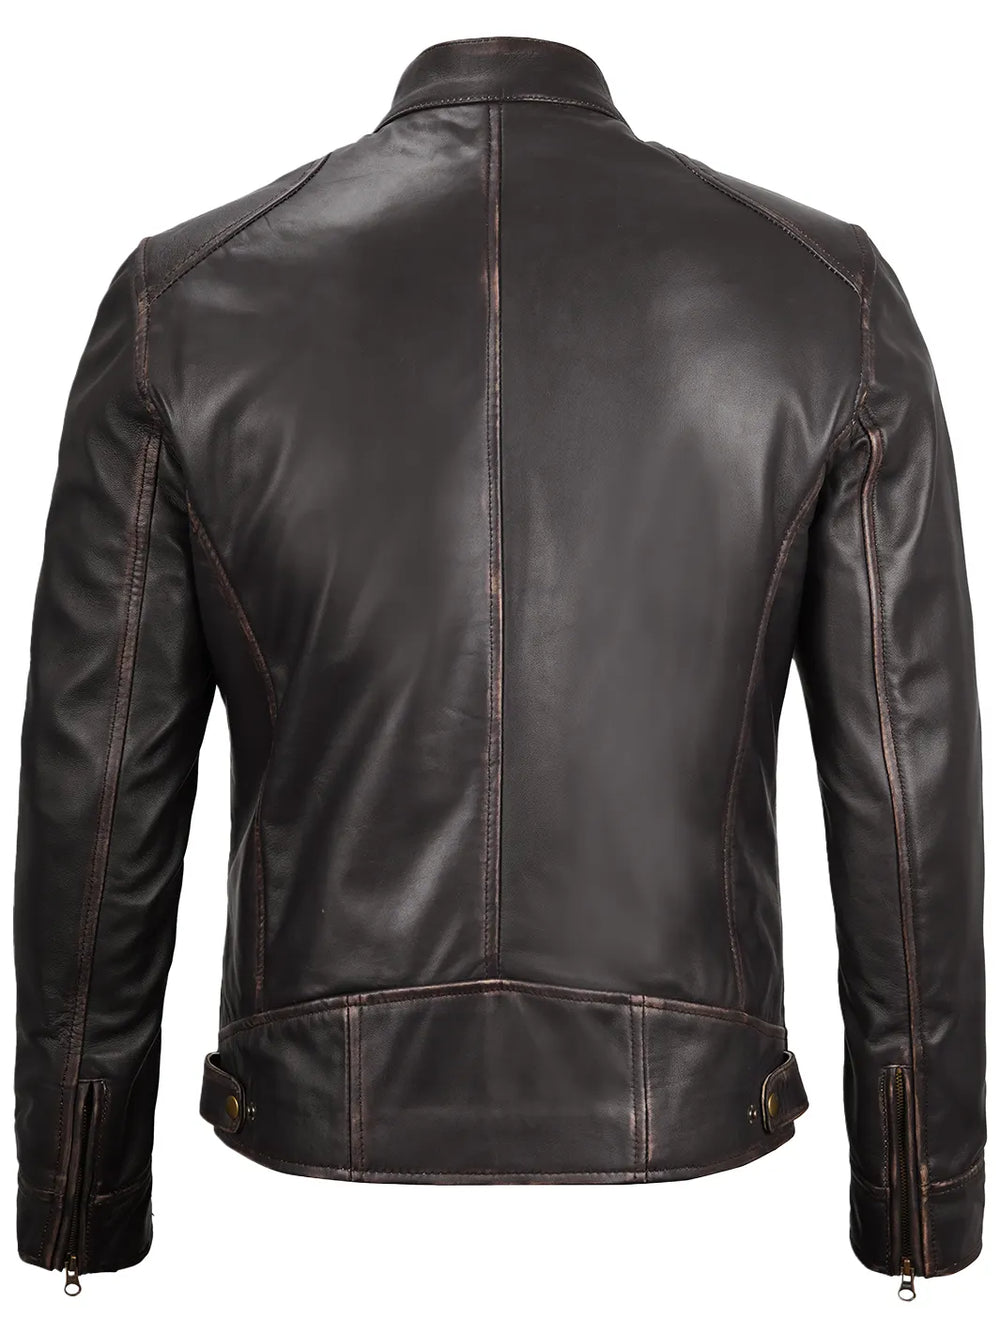 Dark brown real leather jacket for women